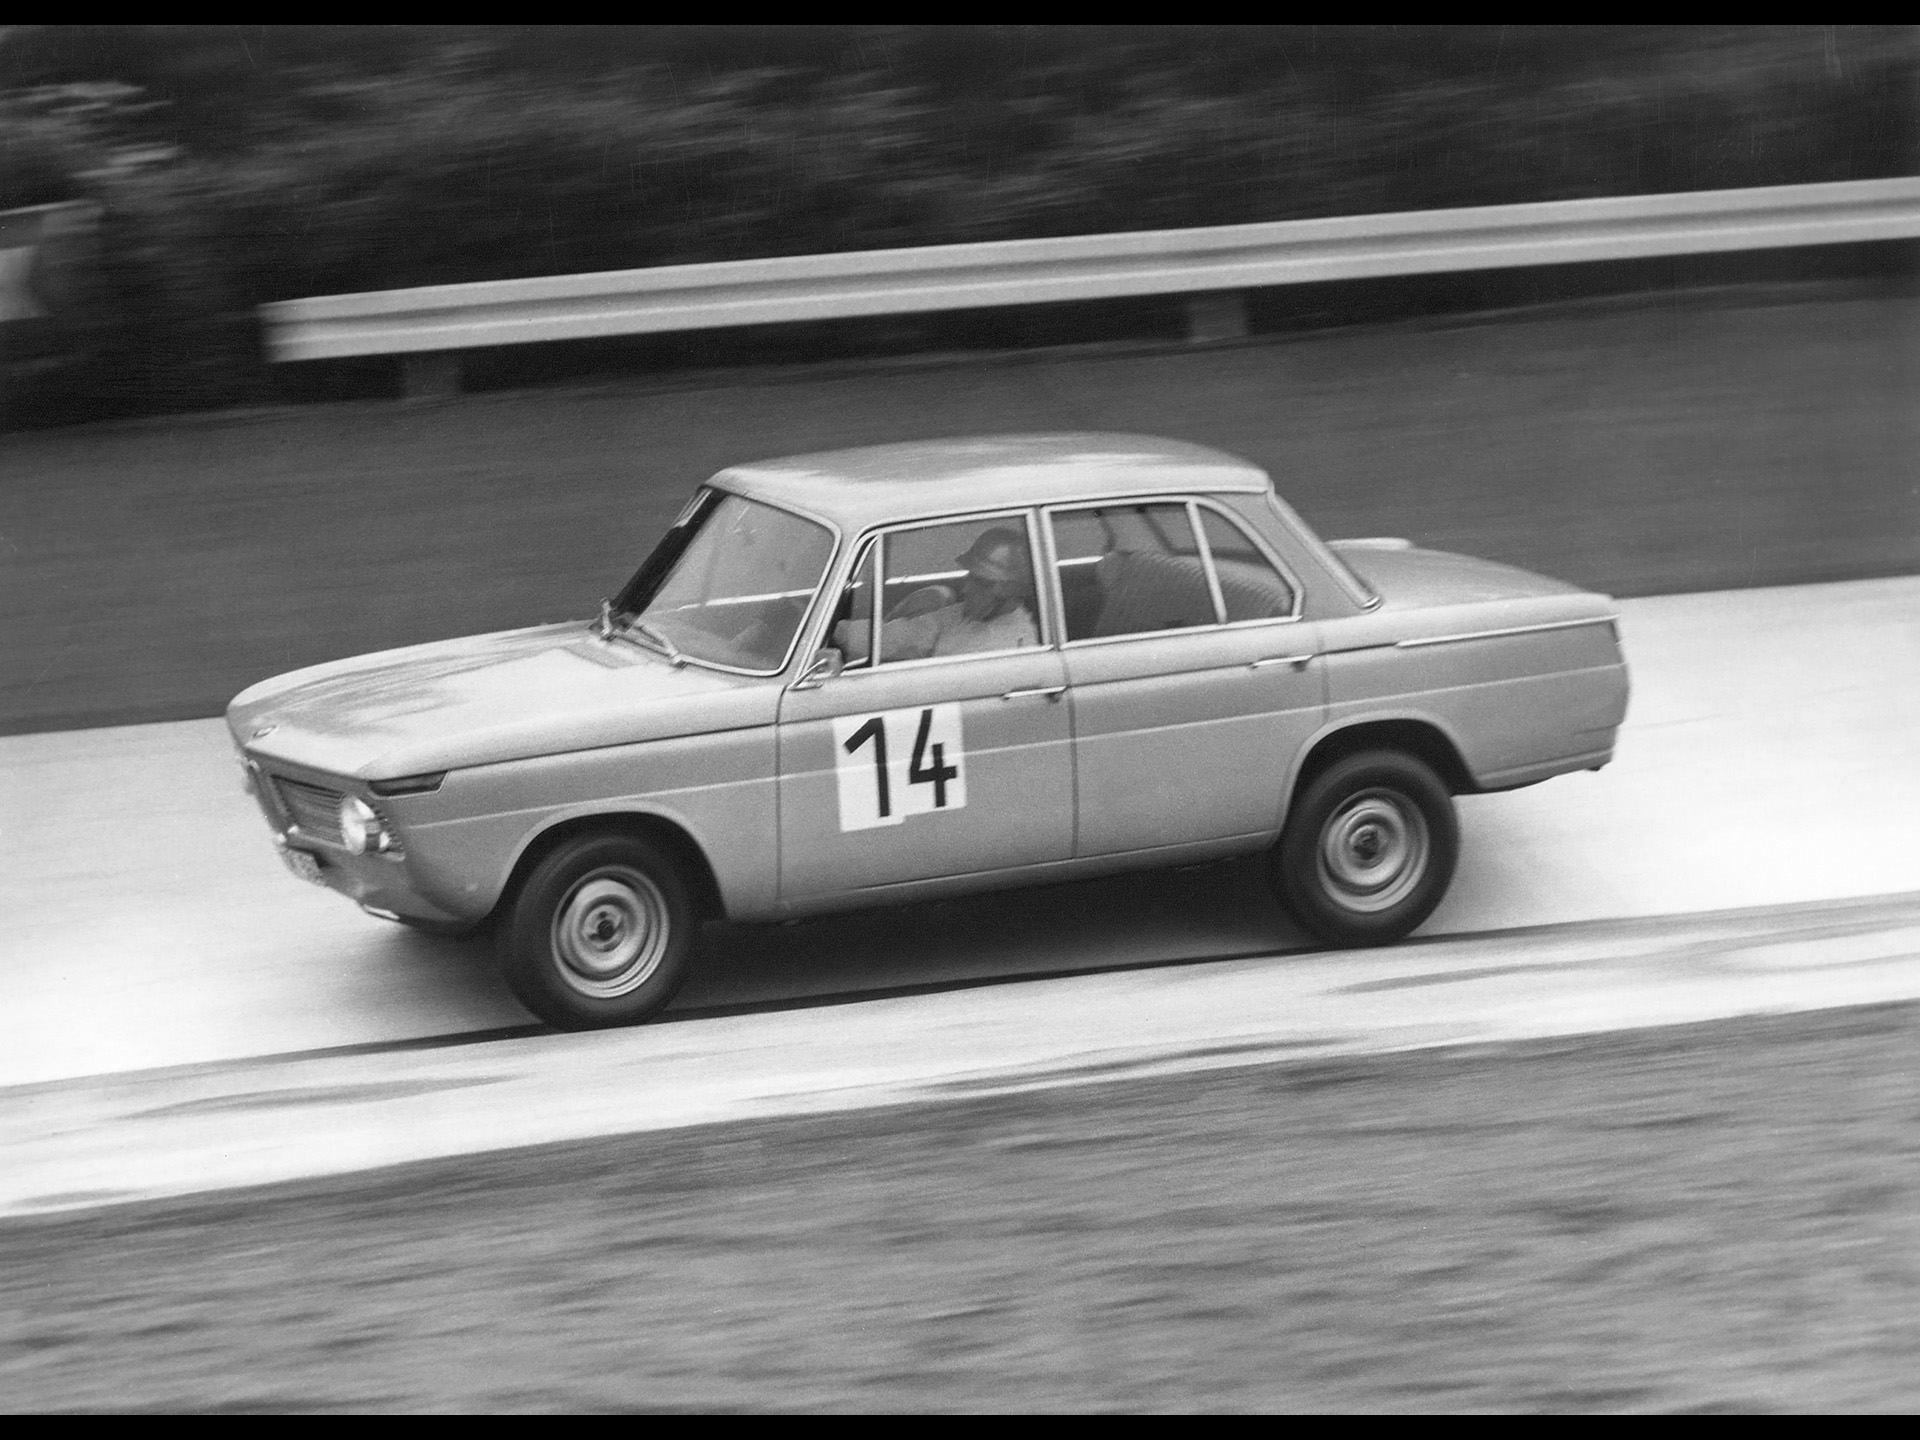 1962-1972 BMW New Class - BMW 1800 TI in 12 Hour Race at the Nurburgring